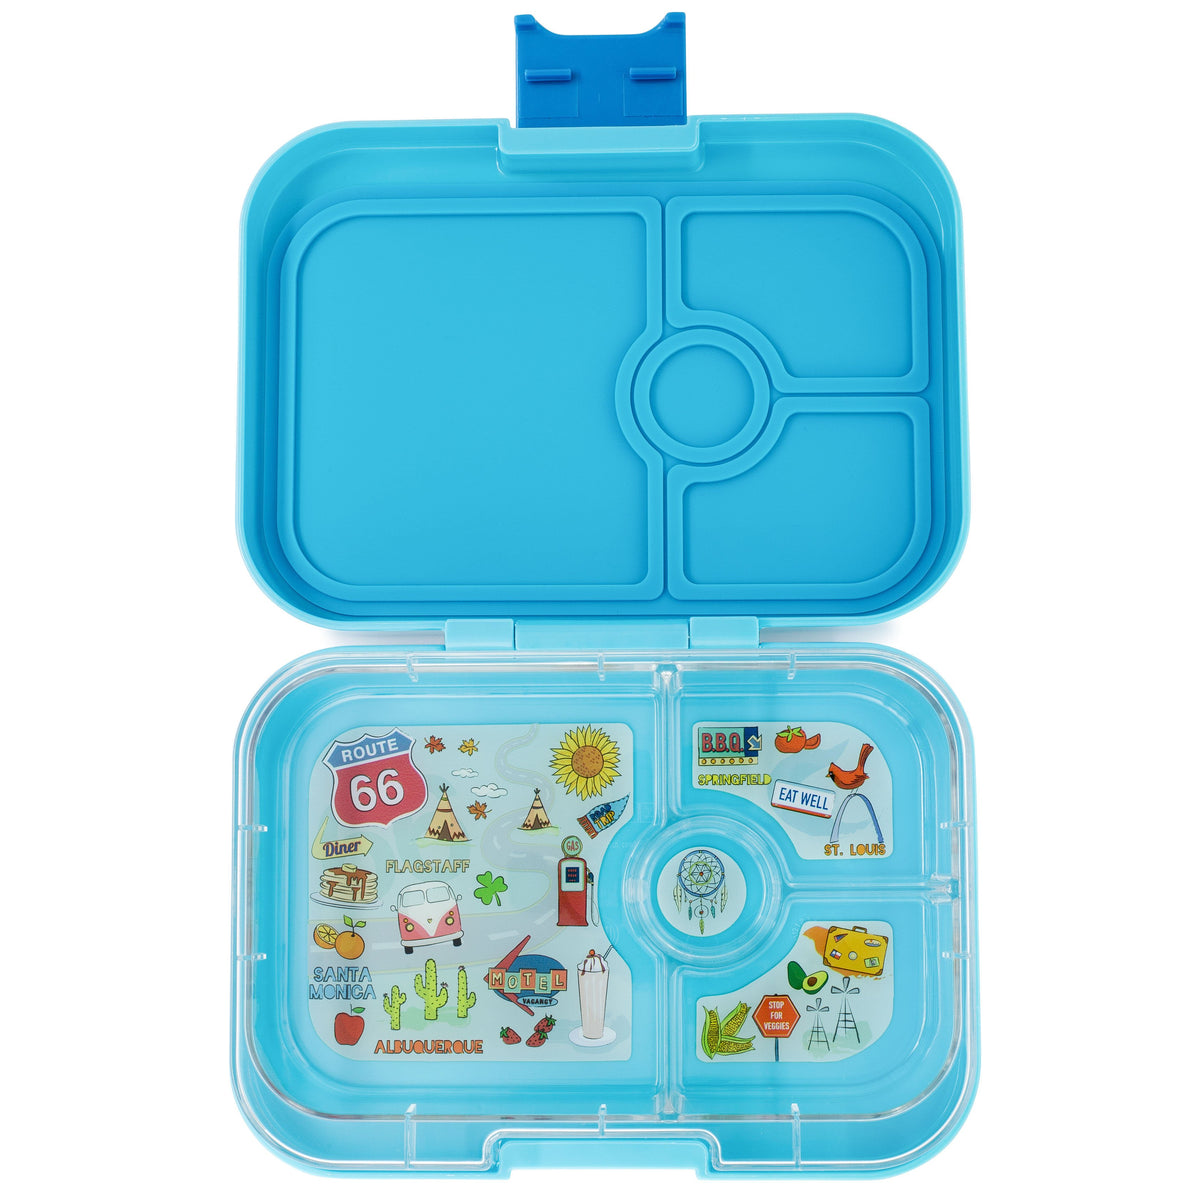 yumbox-panino-blue-fish-route-66-4-compartment-lunch-box- (1)